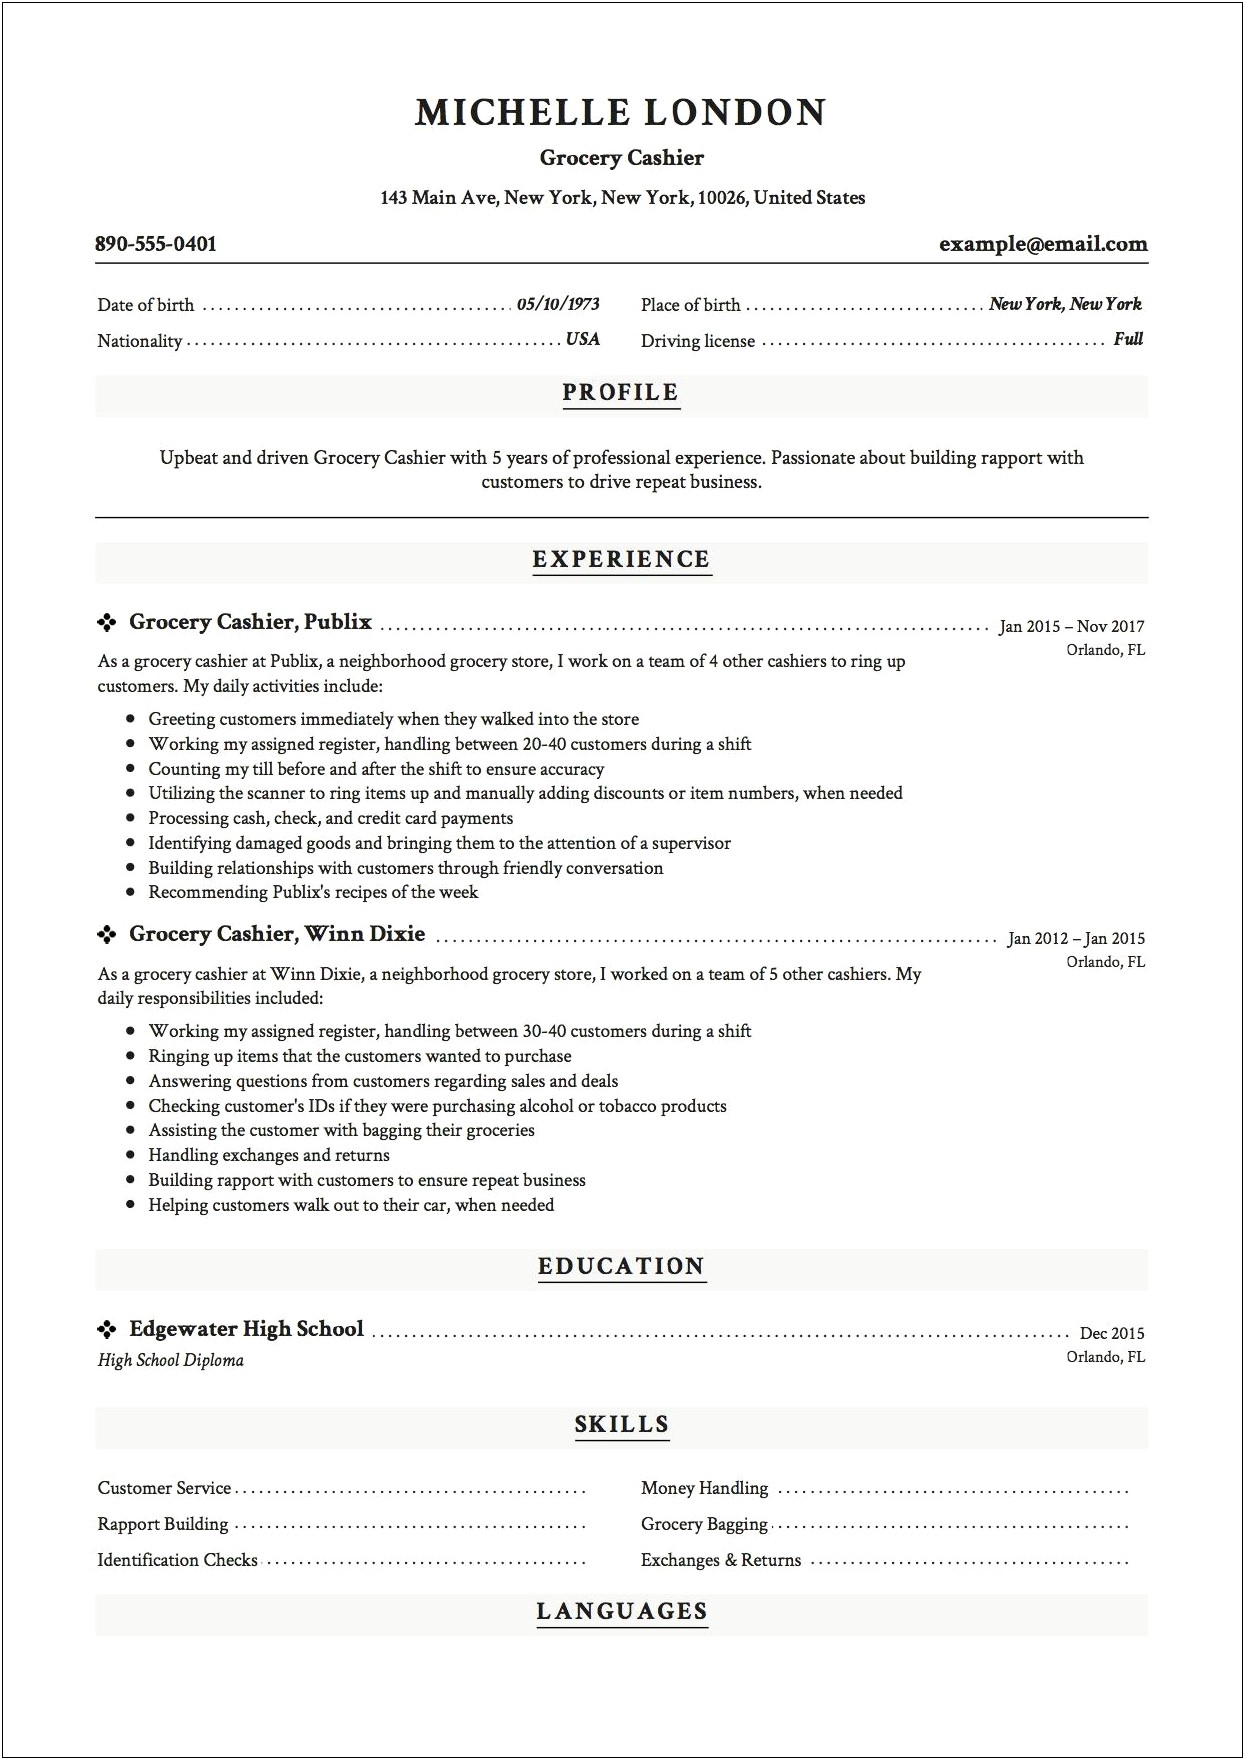 Resume Objective For A Cashier Position